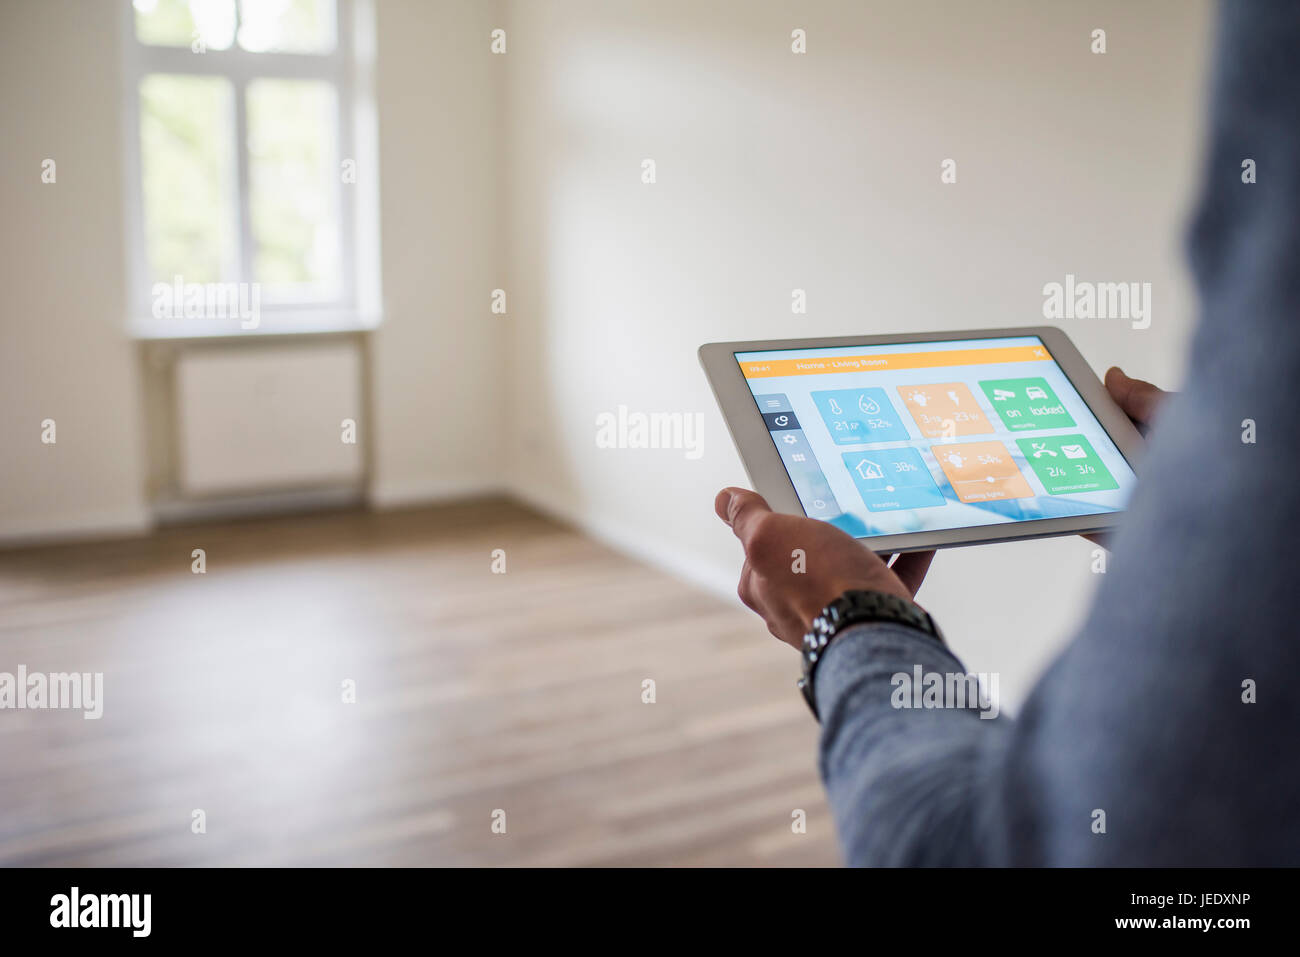 Man in new home using tablet with smart home apps Stock Photo